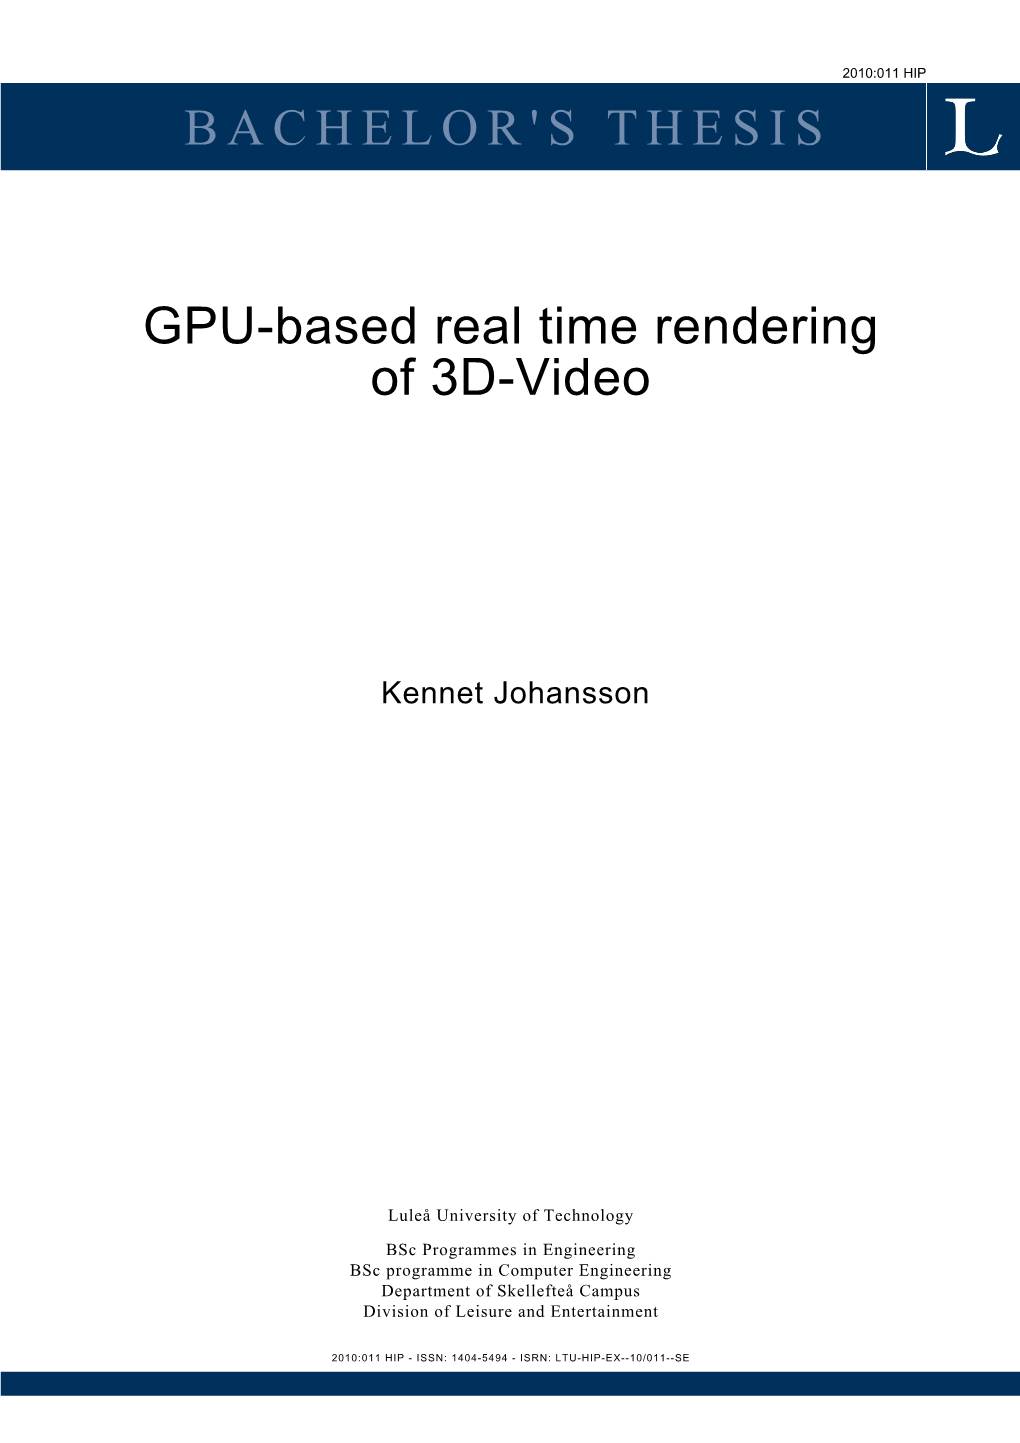 BACHELOR's THESIS GPU-Based Real Time Rendering of 3D-Video